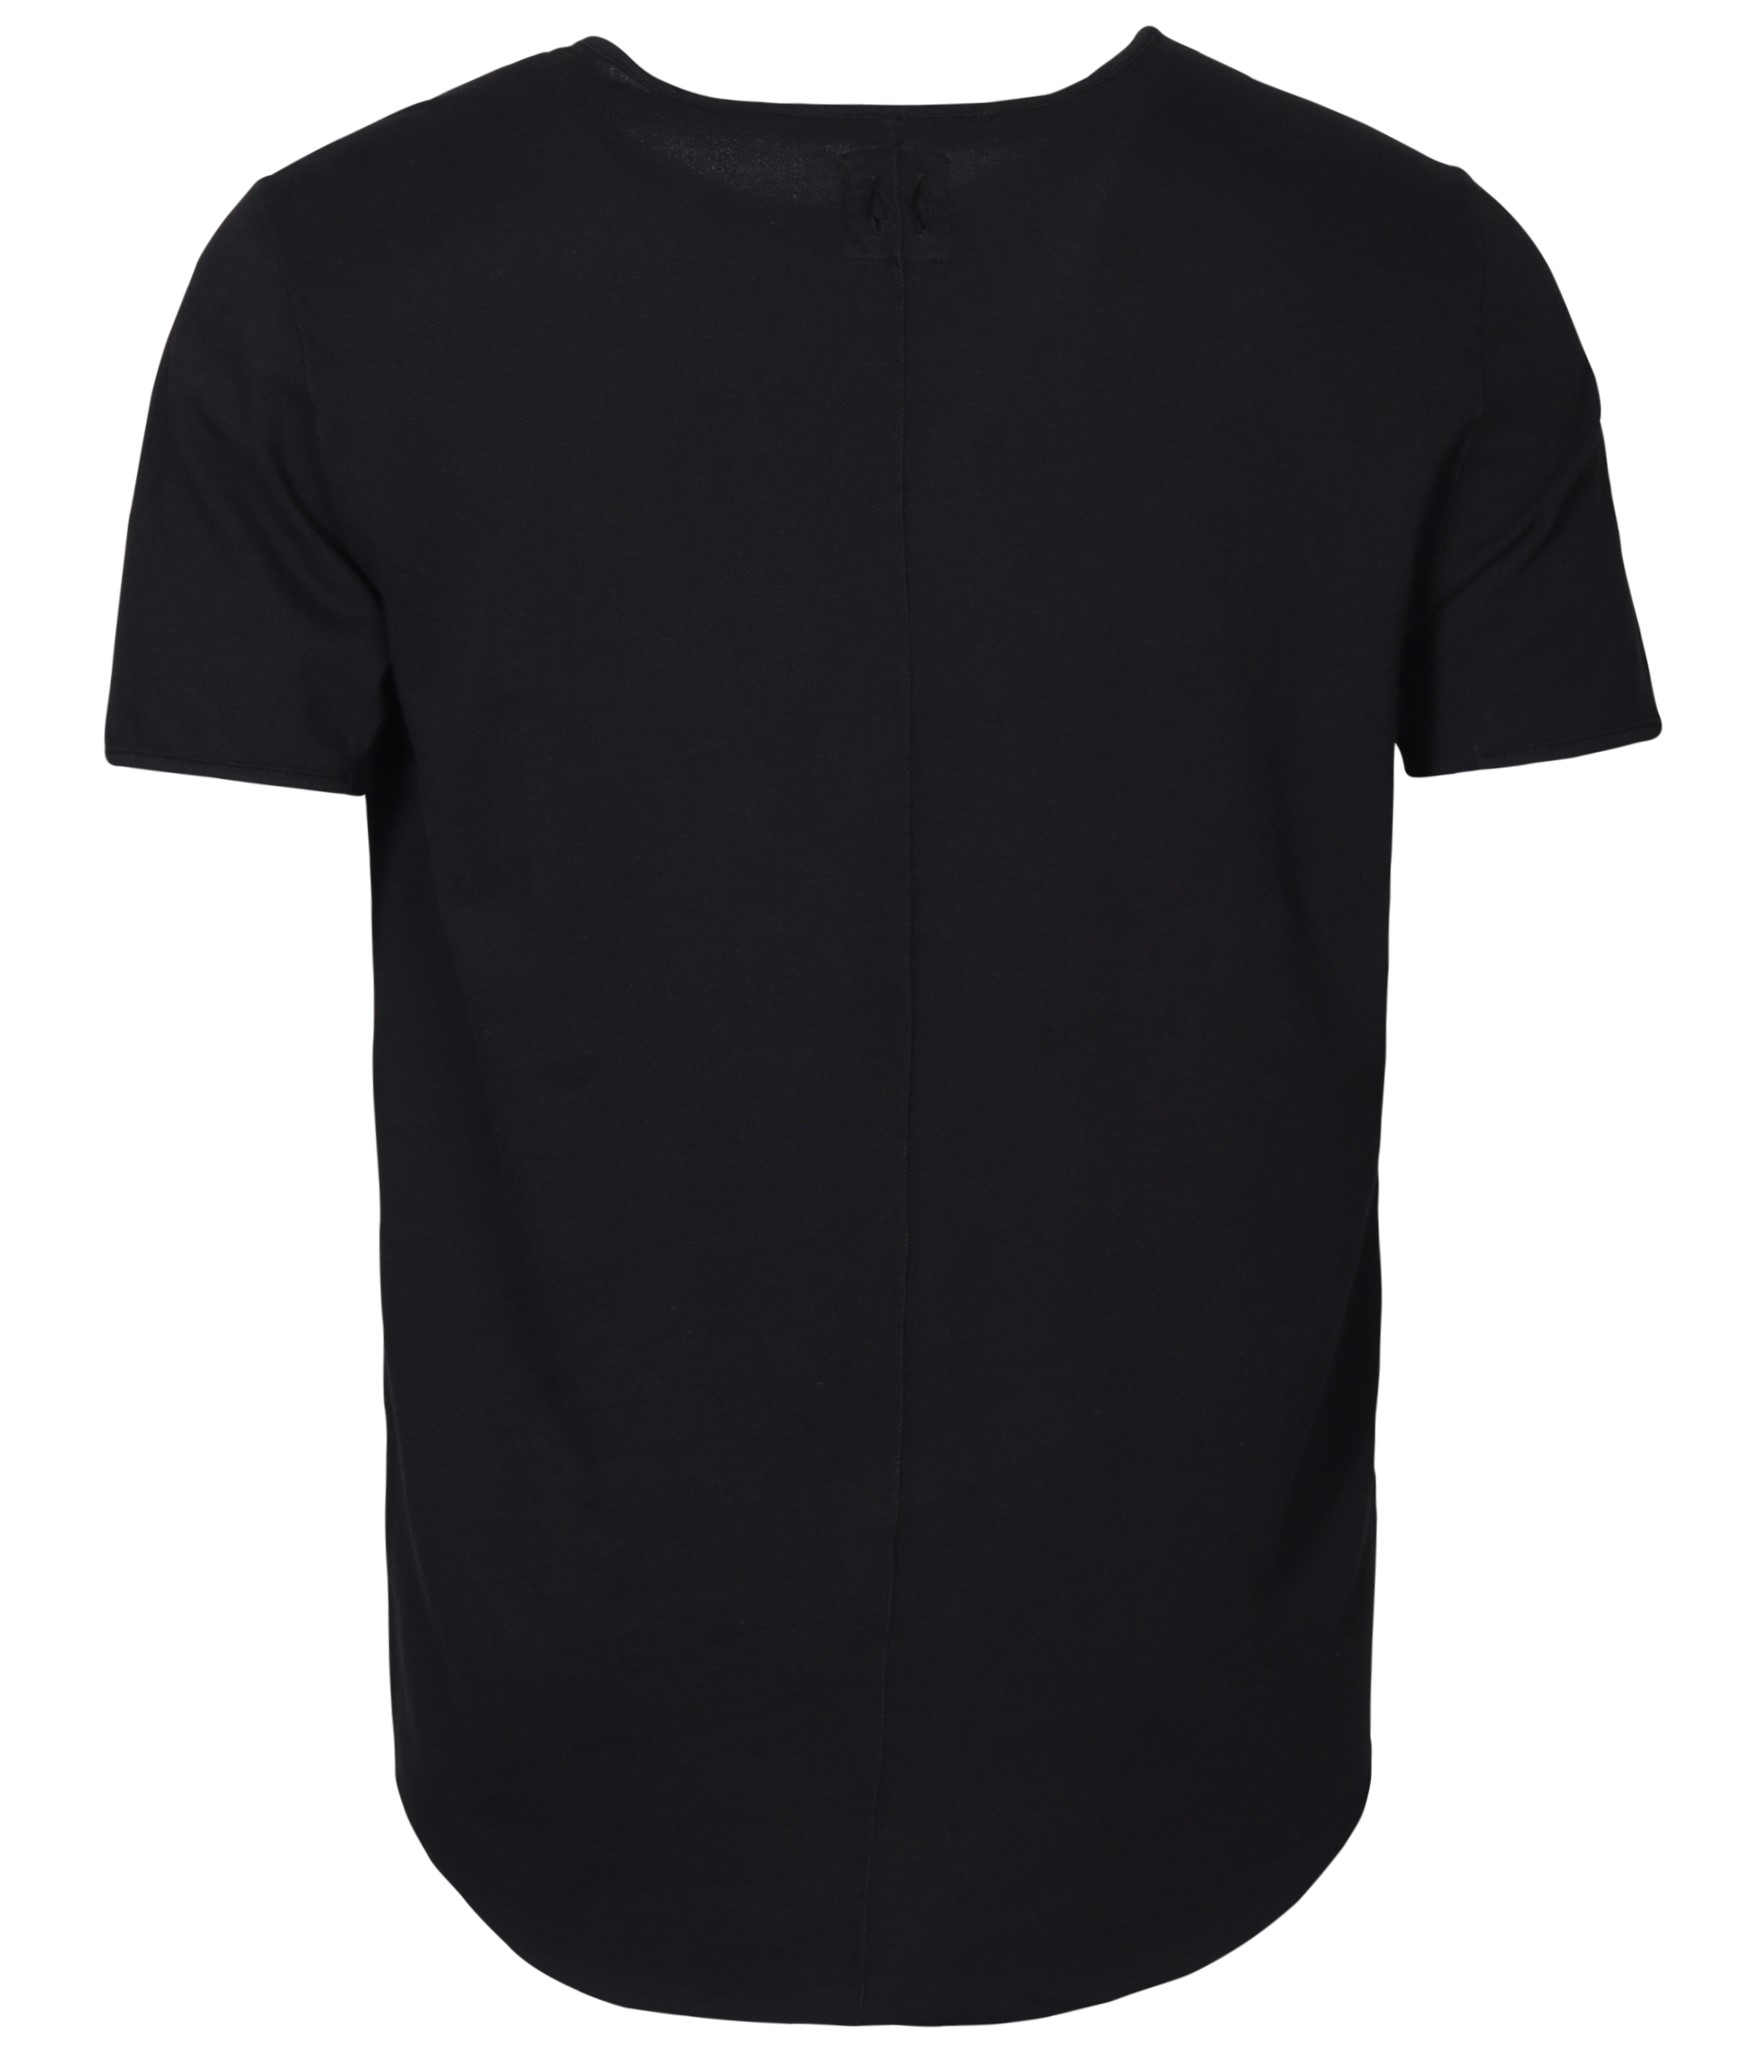 HANNES ROETHER T-Shirt in Black L